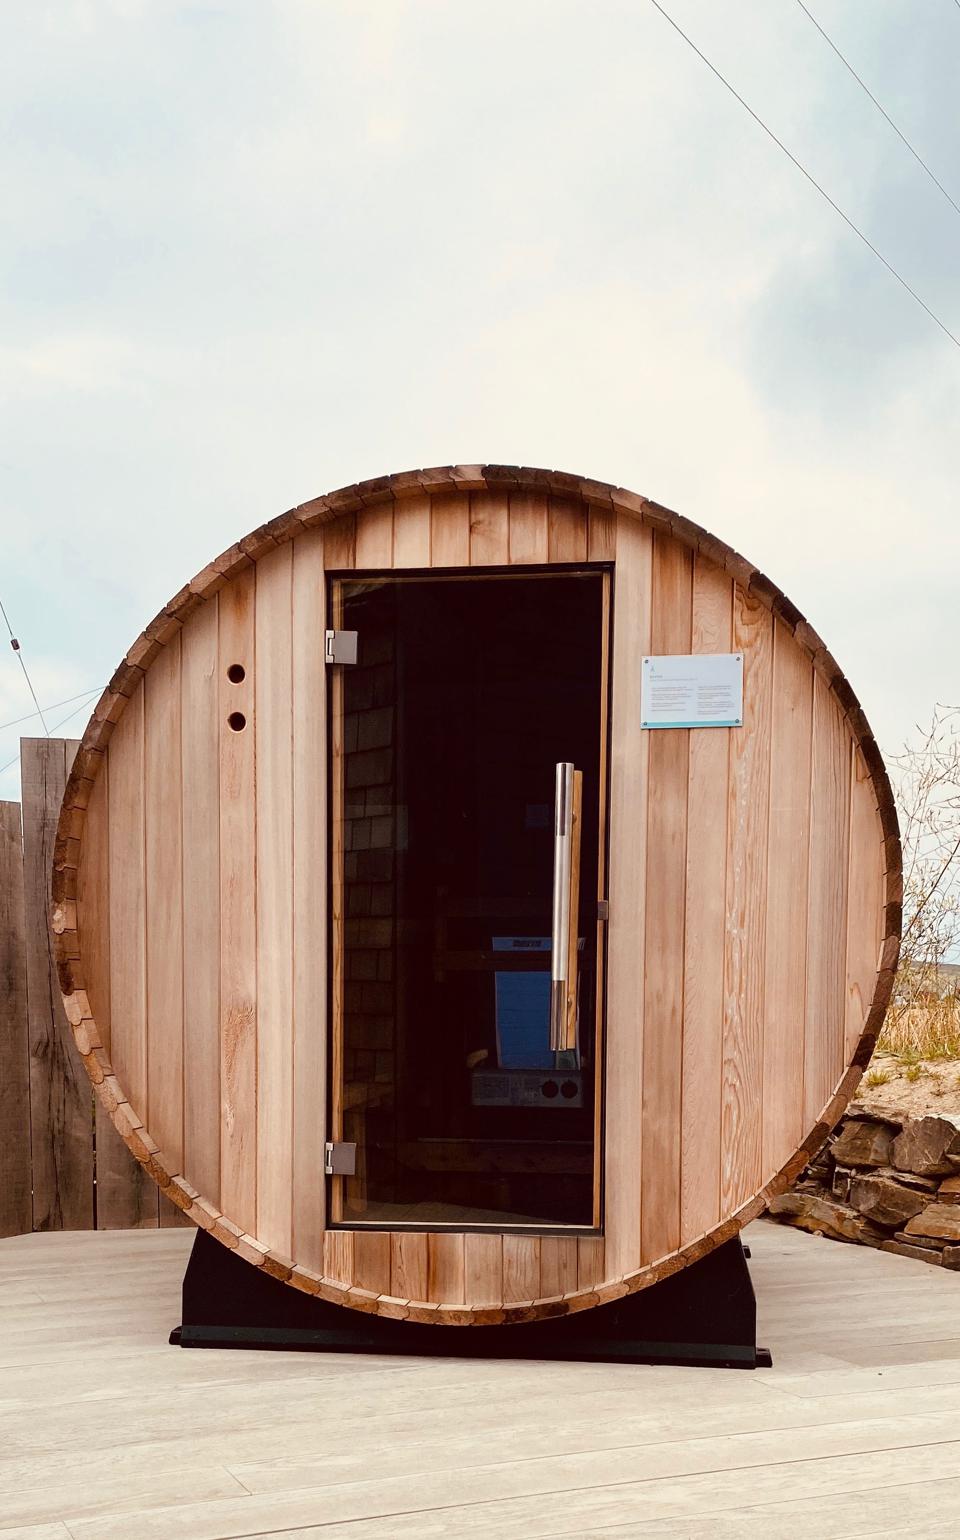 The outside space has a sunken hot tub and barrel sauna. (CREDIT: AVC)